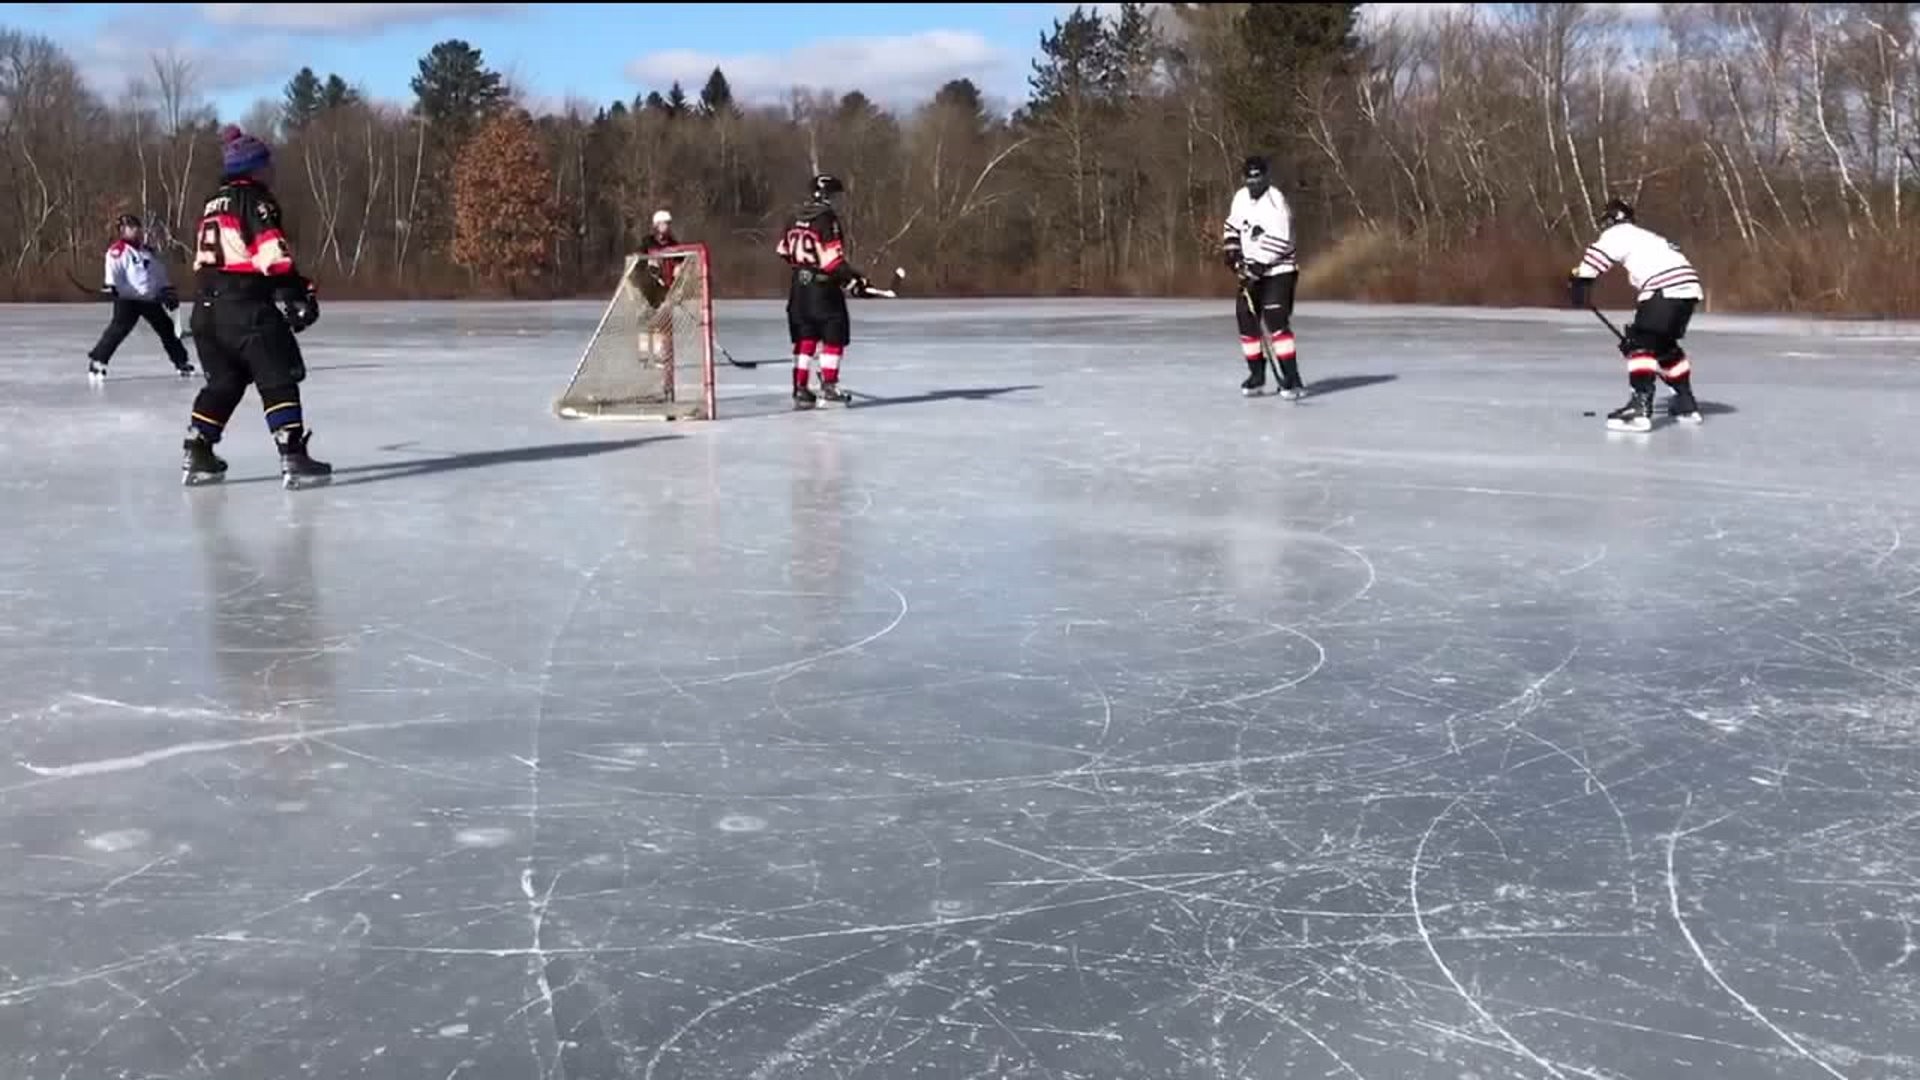 Hockey Games Go on After Wally Ice Fest Canceled